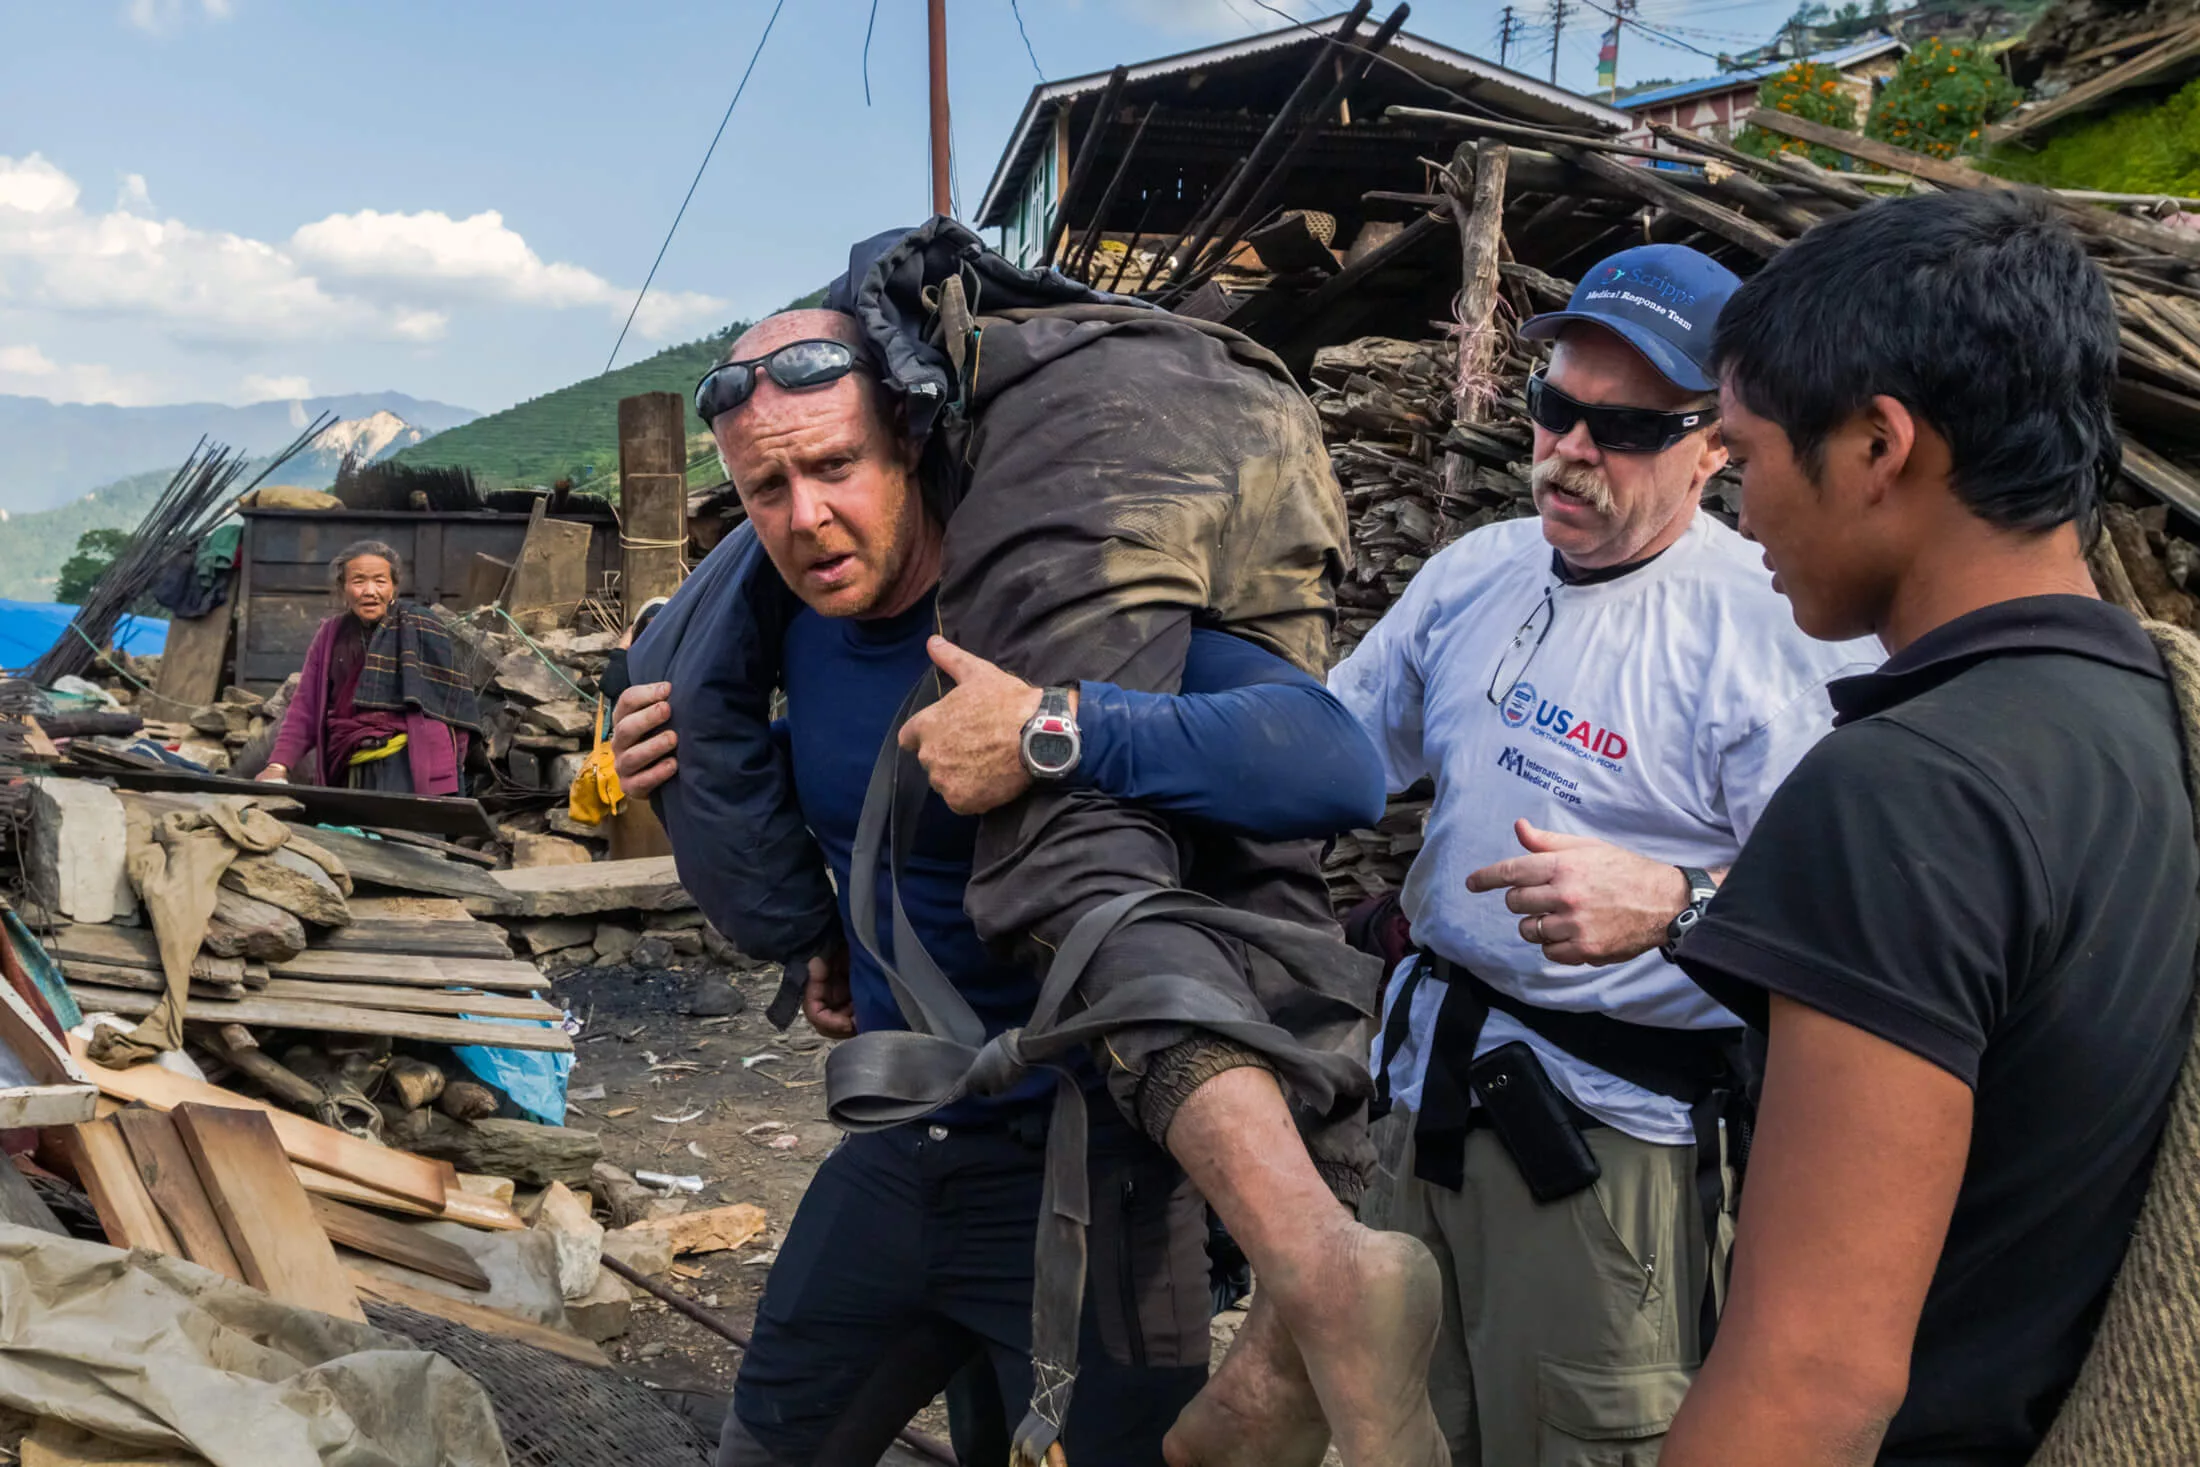 Dr. Michael Karch carries an injured man uphill during a rescue mission in Nepal.